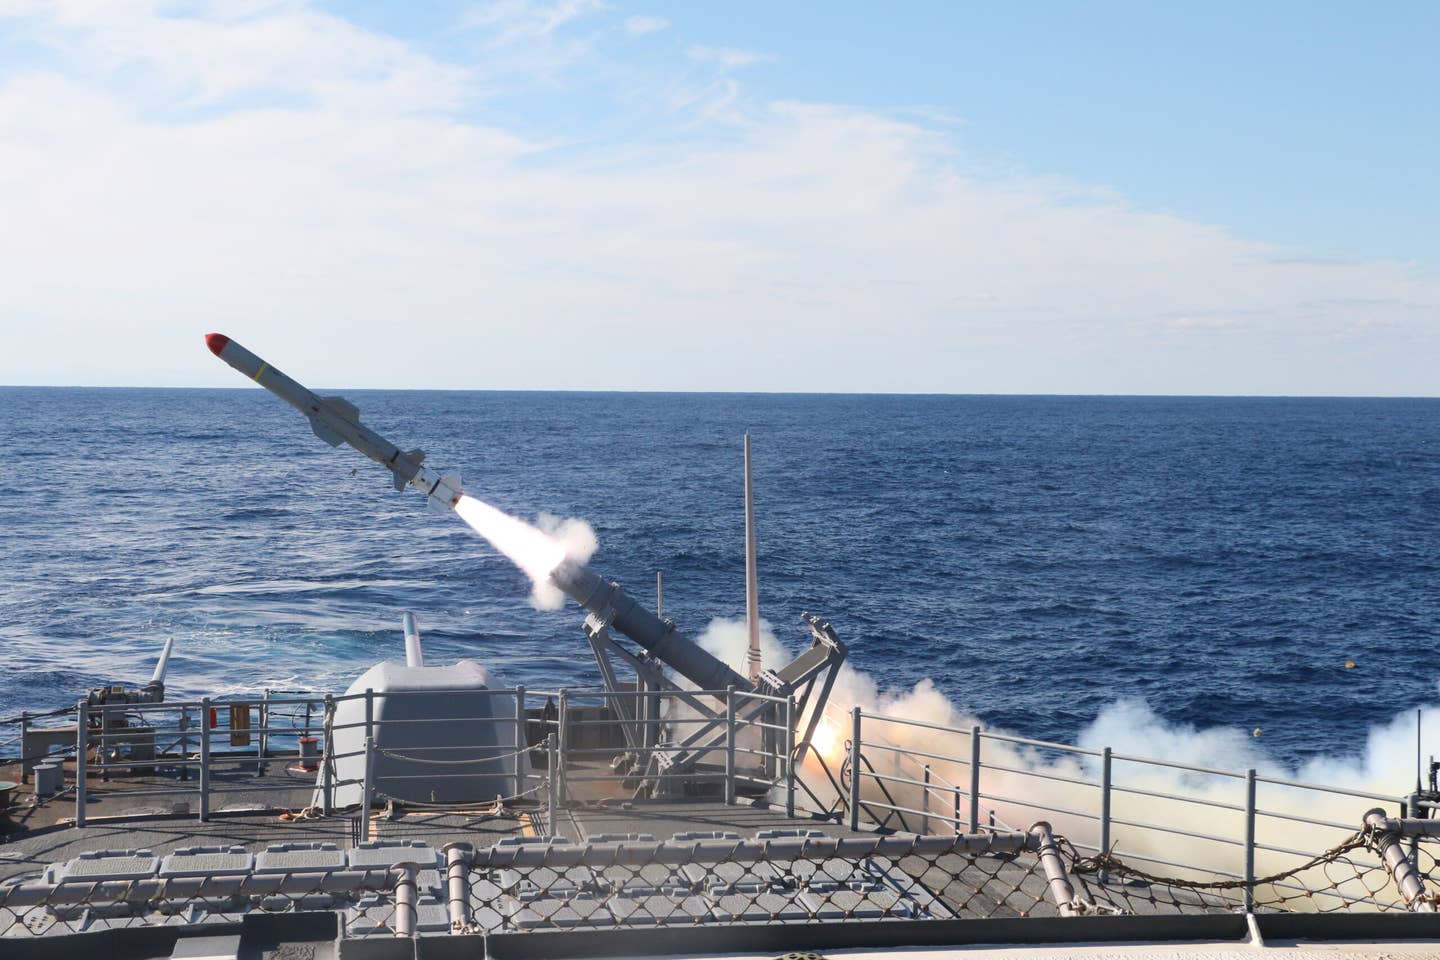 The <em>Ticonderoga</em> class guided-missile cruiser USS <em>Monterey</em> launches a harpoon surface-to-surface missile during a Surface Warfare Advanced Tactical Training exercise. <em>Credit: U.S. Navy photo by Fire Controlman Third Class Raymond Castillo</em>